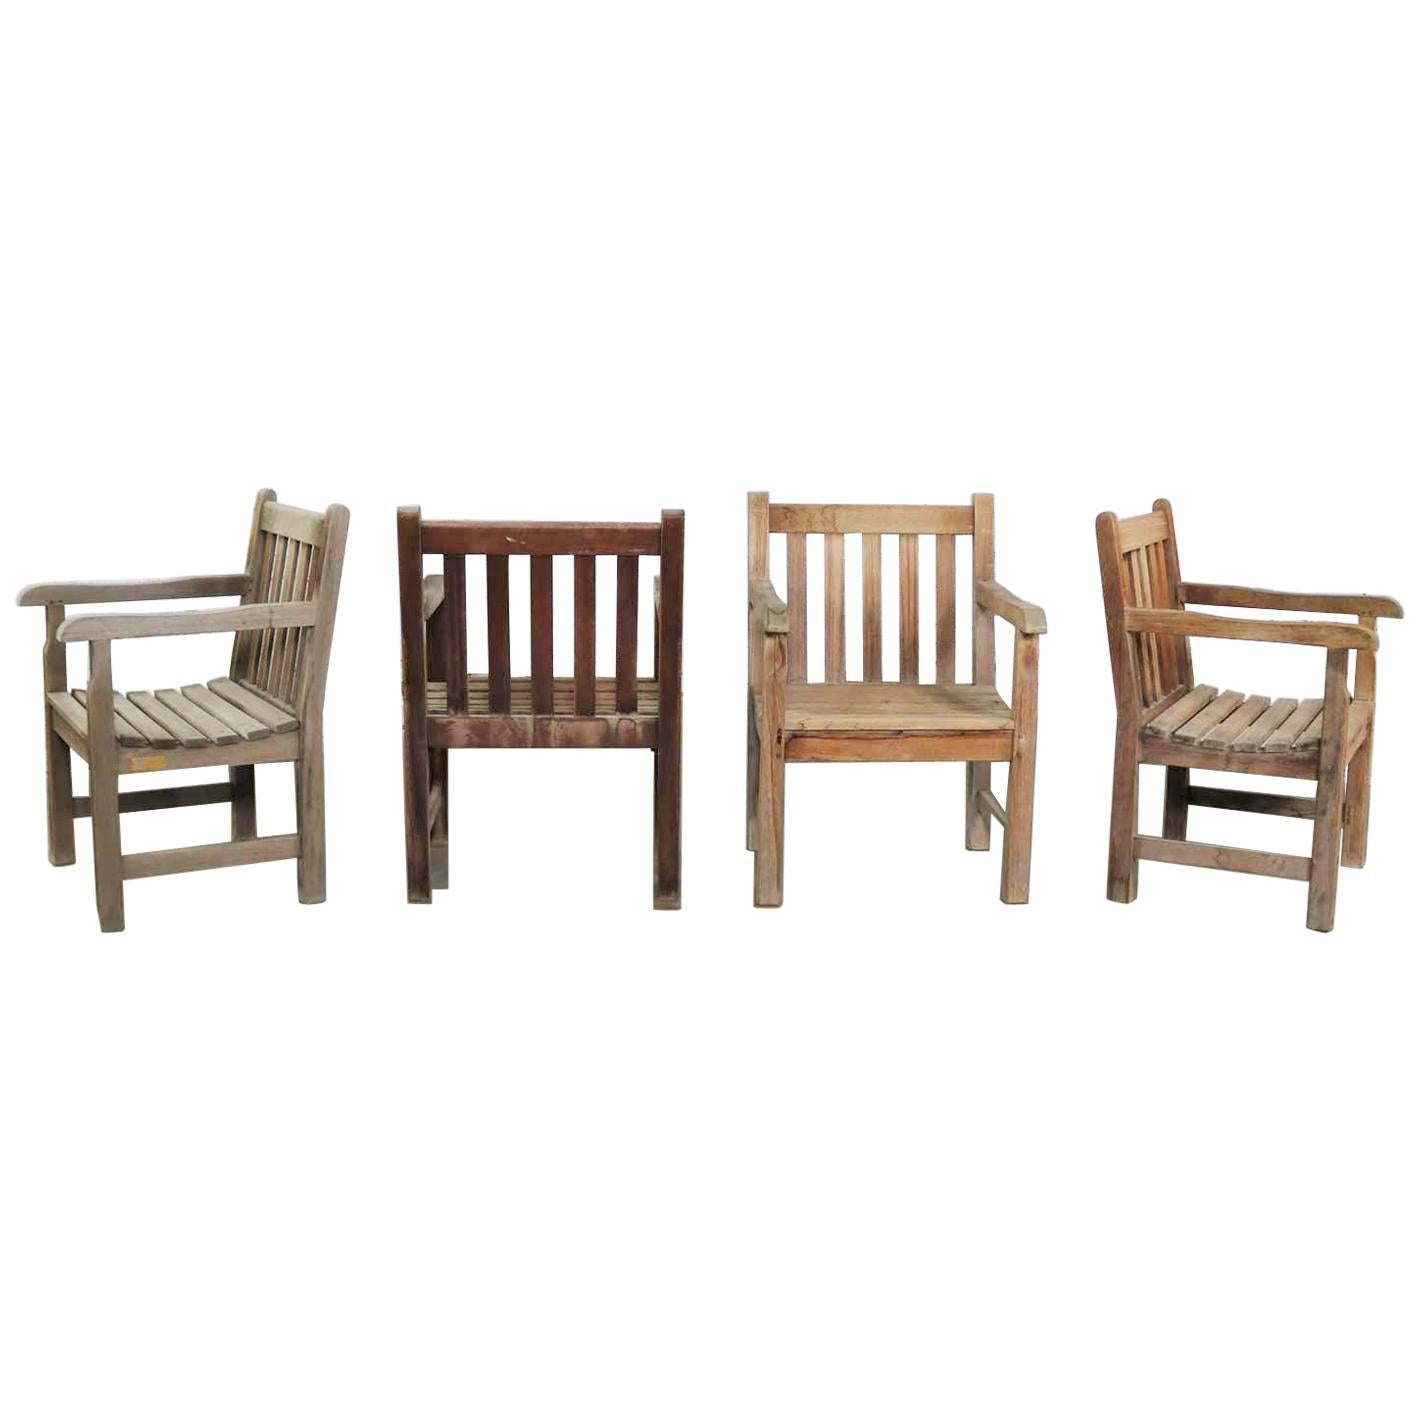 Vintage Windsor Natural Teak Outdoor Armchair with Age Patina